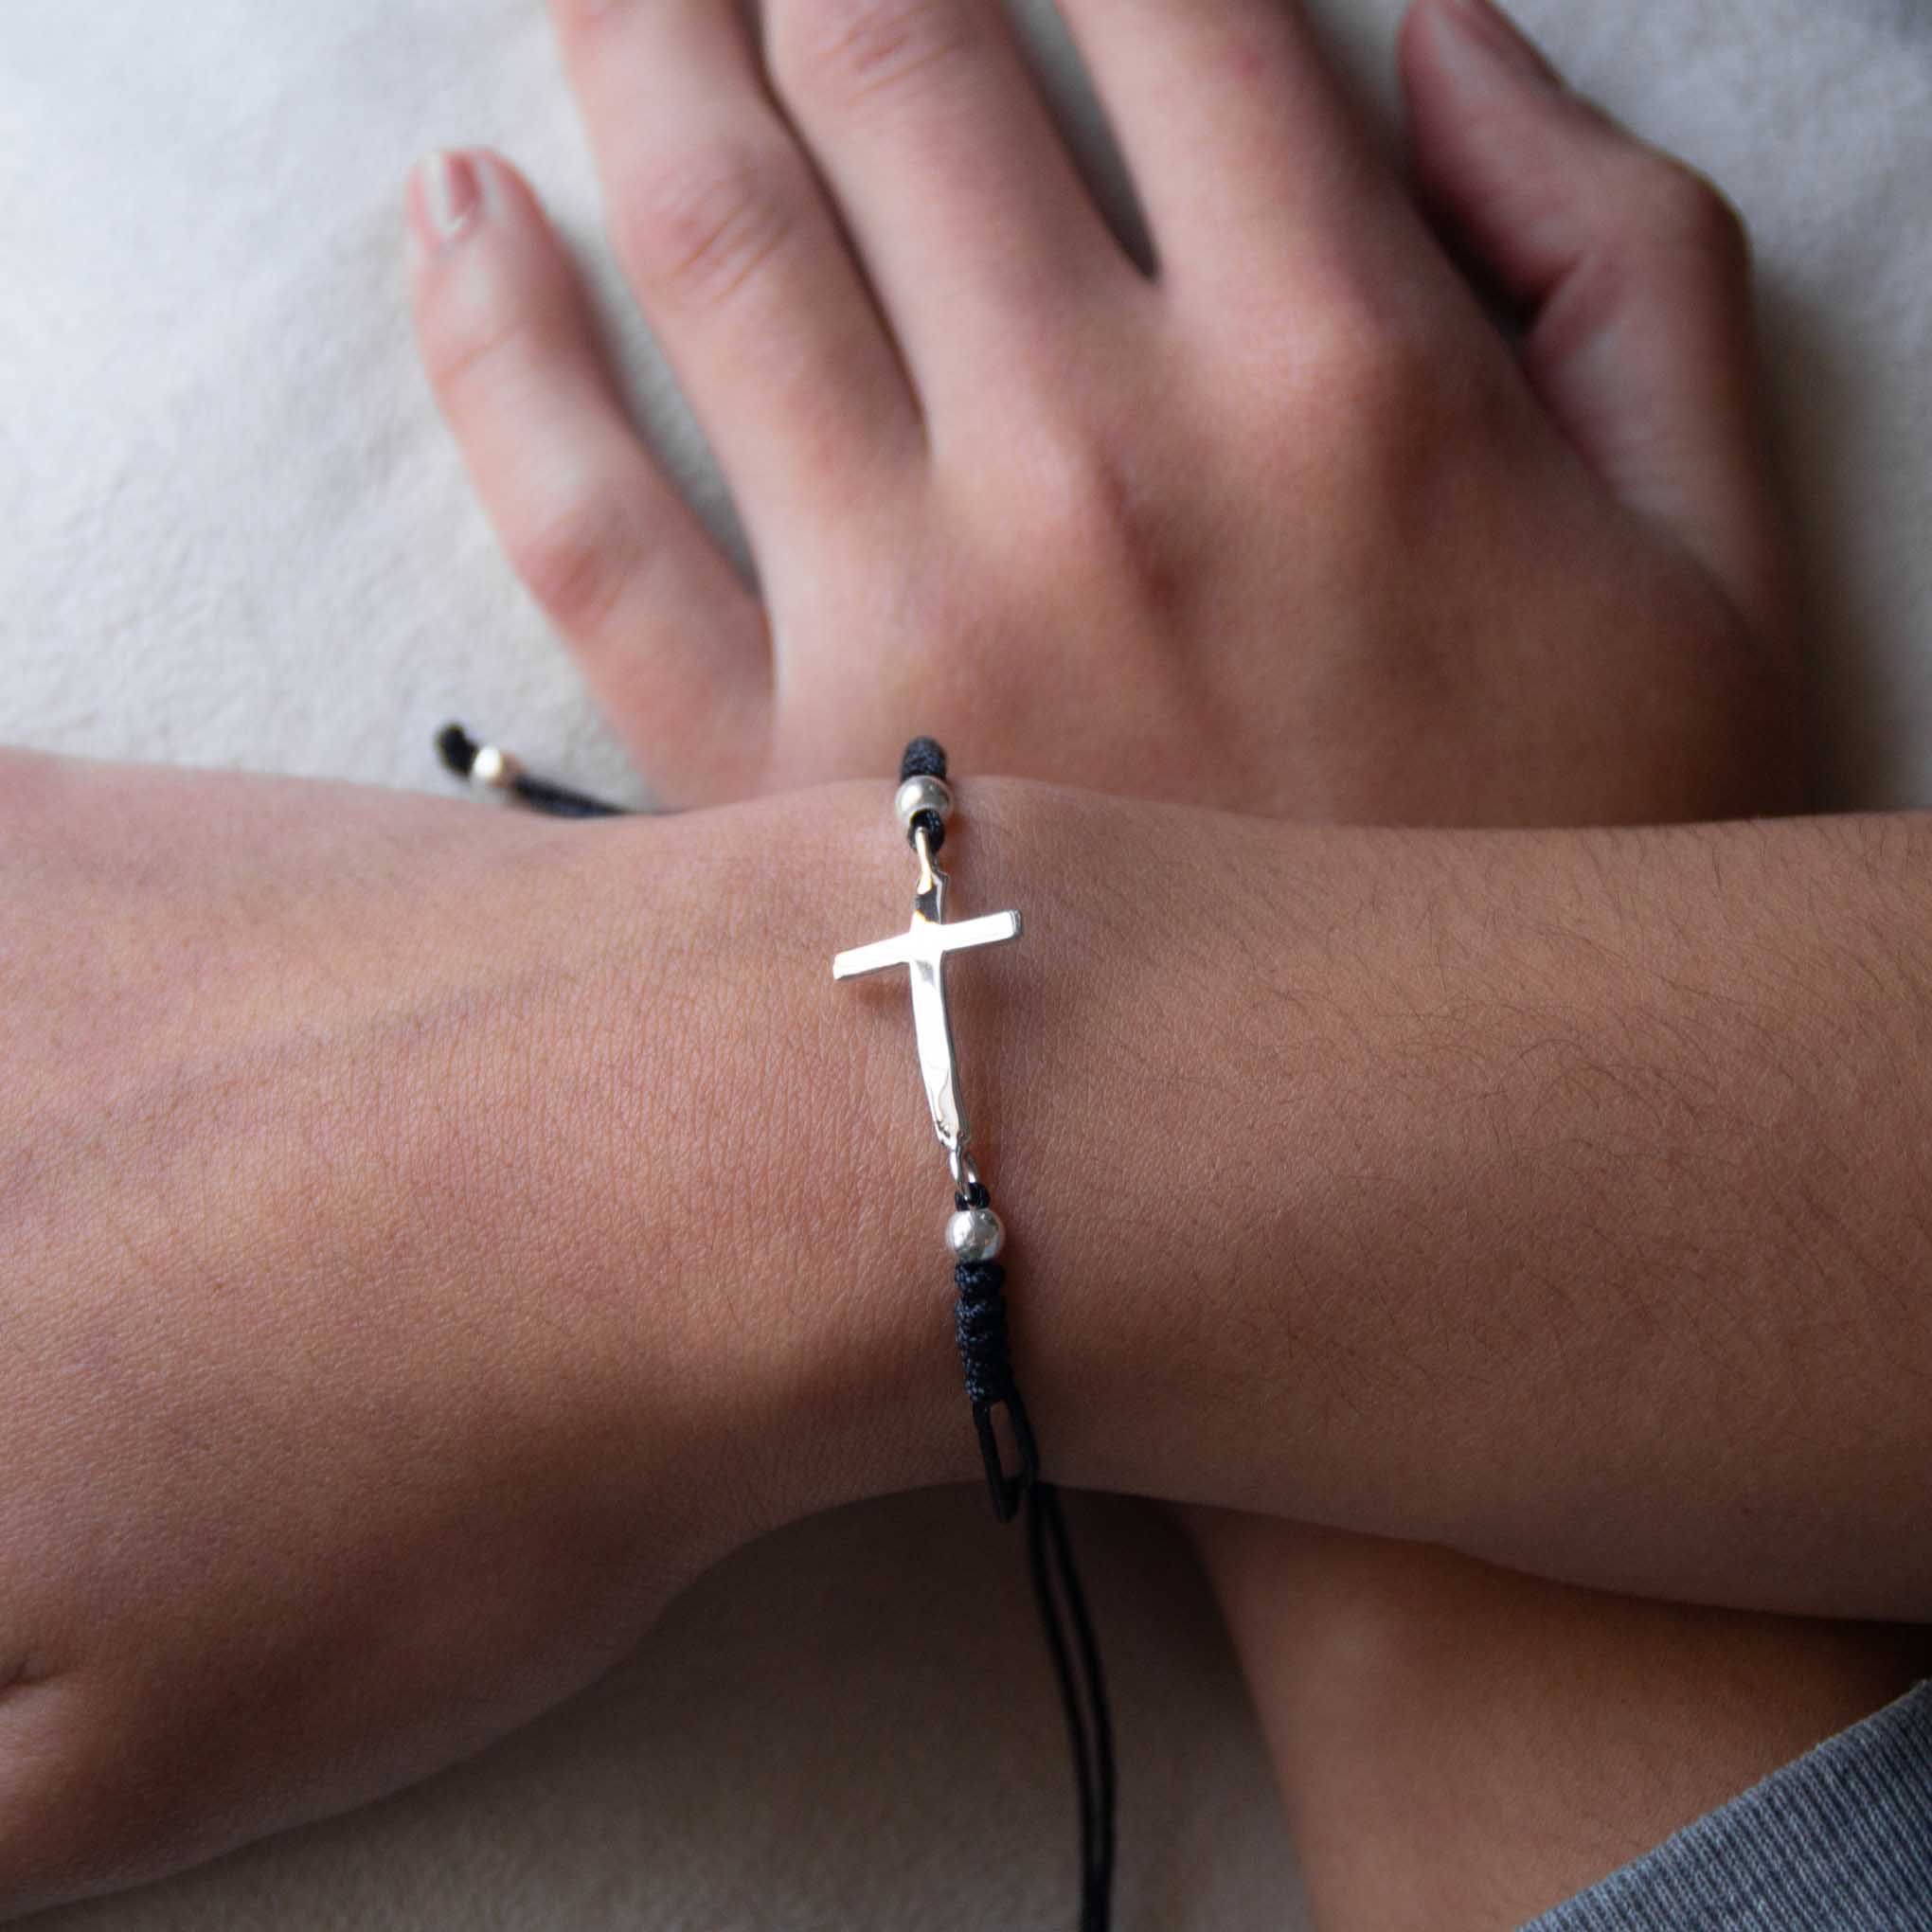 Bracelet of thread with silver cross